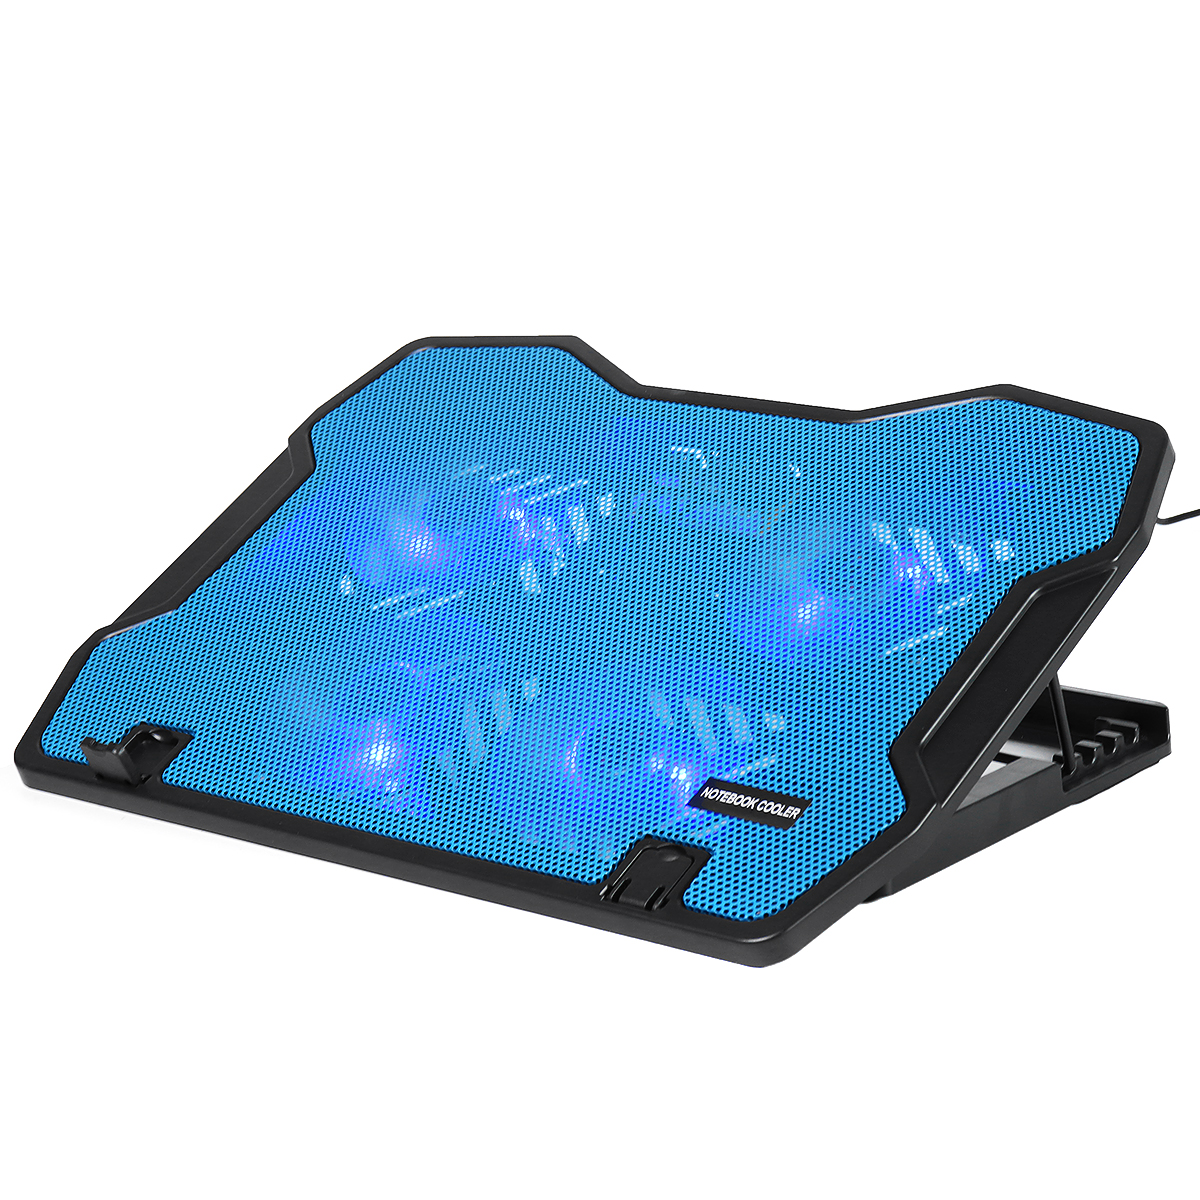 Find 4 Fan Adjustable Laptop Cooling Pad Cooler Portable Stand For 14-17inch Laptop for Sale on Gipsybee.com with cryptocurrencies